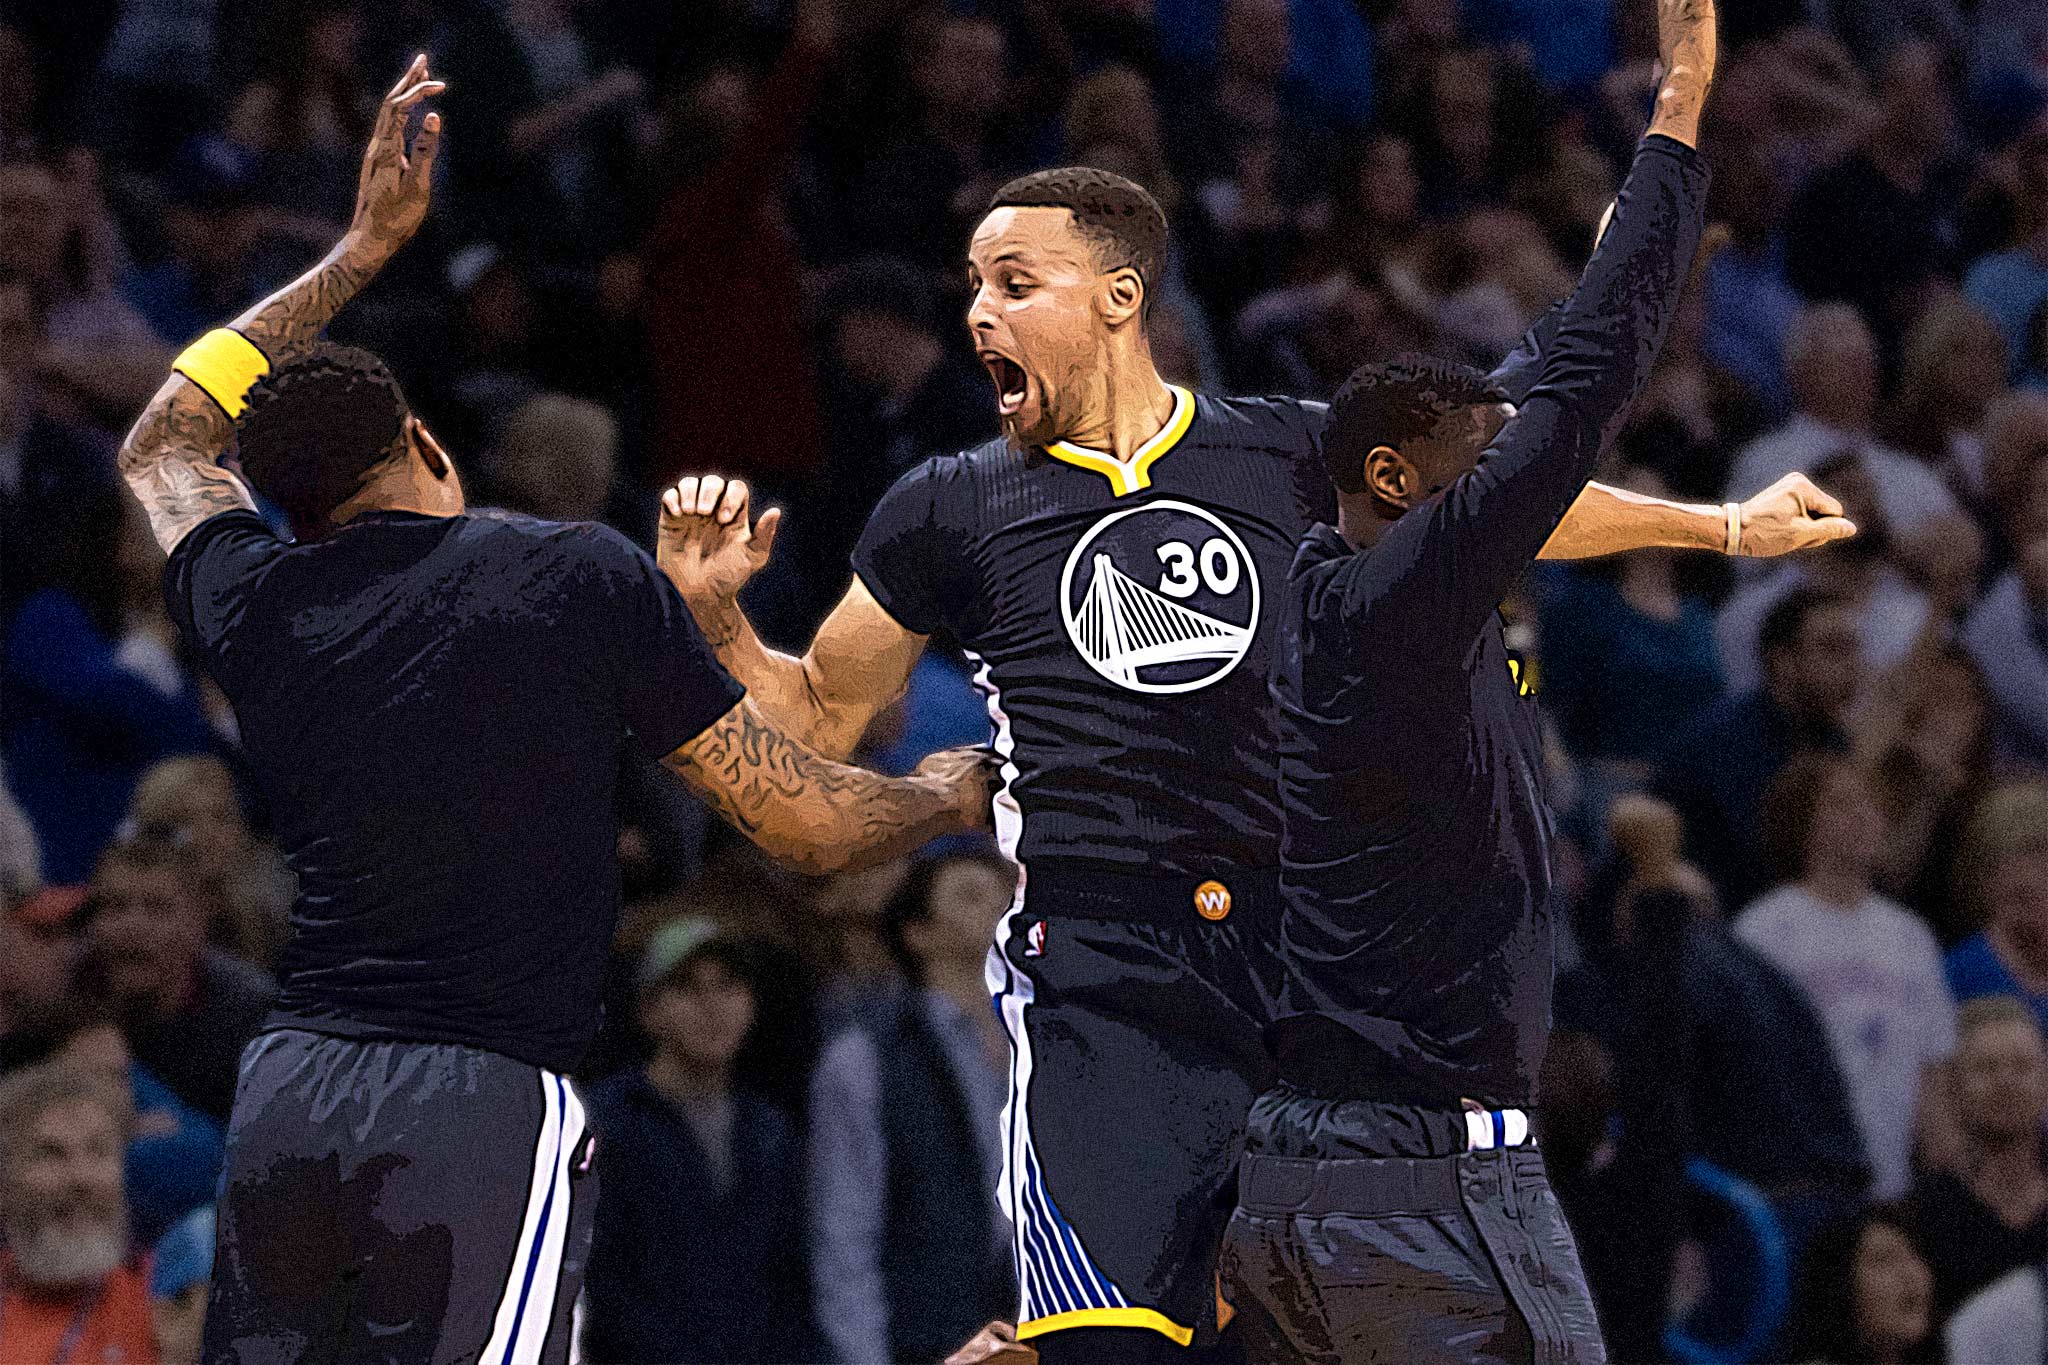 Stephen Curry lights up Pelicans for 40 points, Warriors get rings